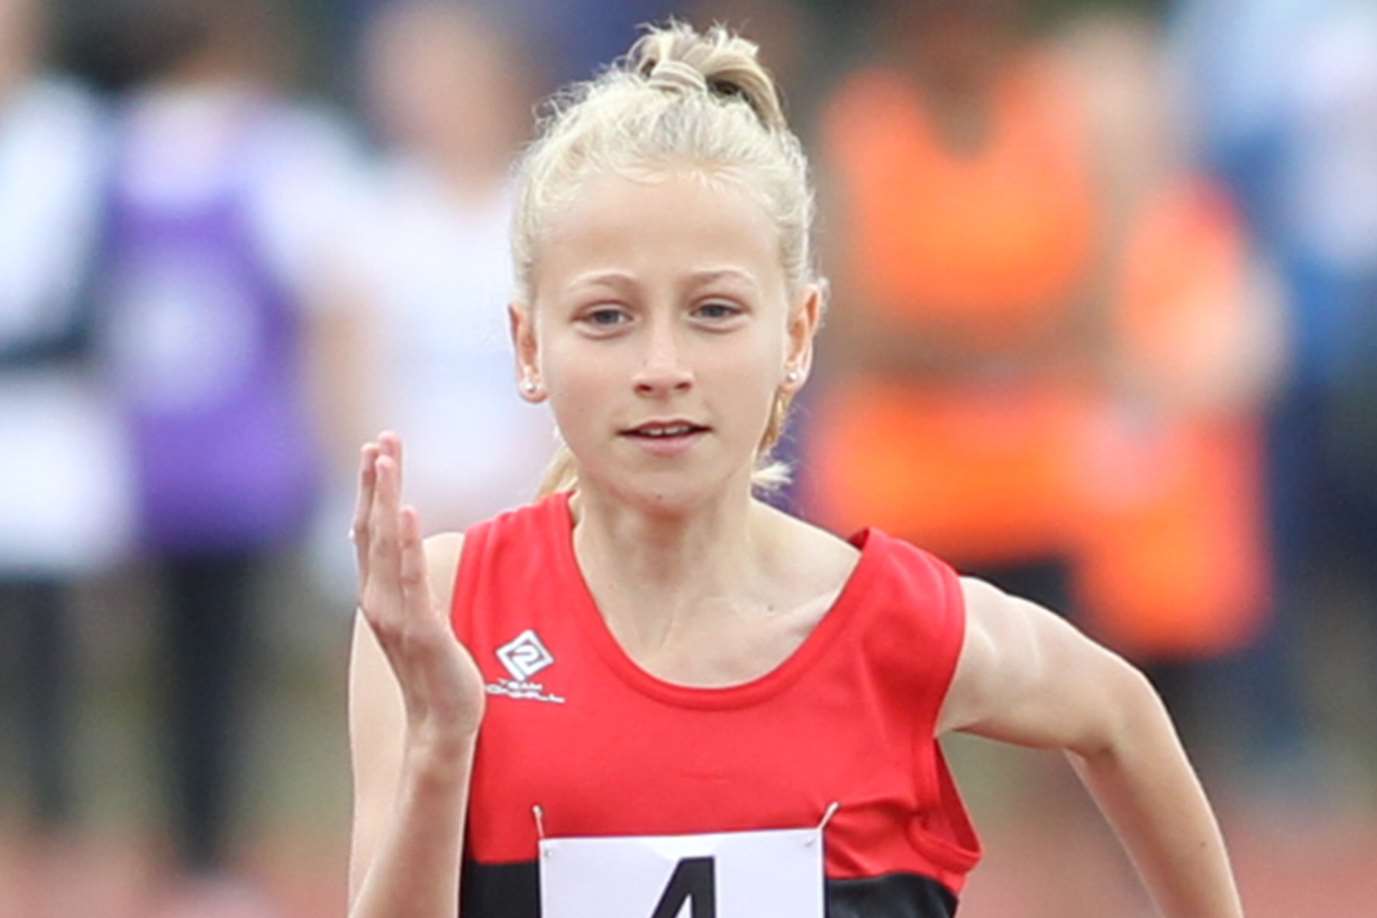 Lucy Maunders was a winner in the high jump for Medway and Maidstone in the UK Youth Development League Picture: John Westhrop